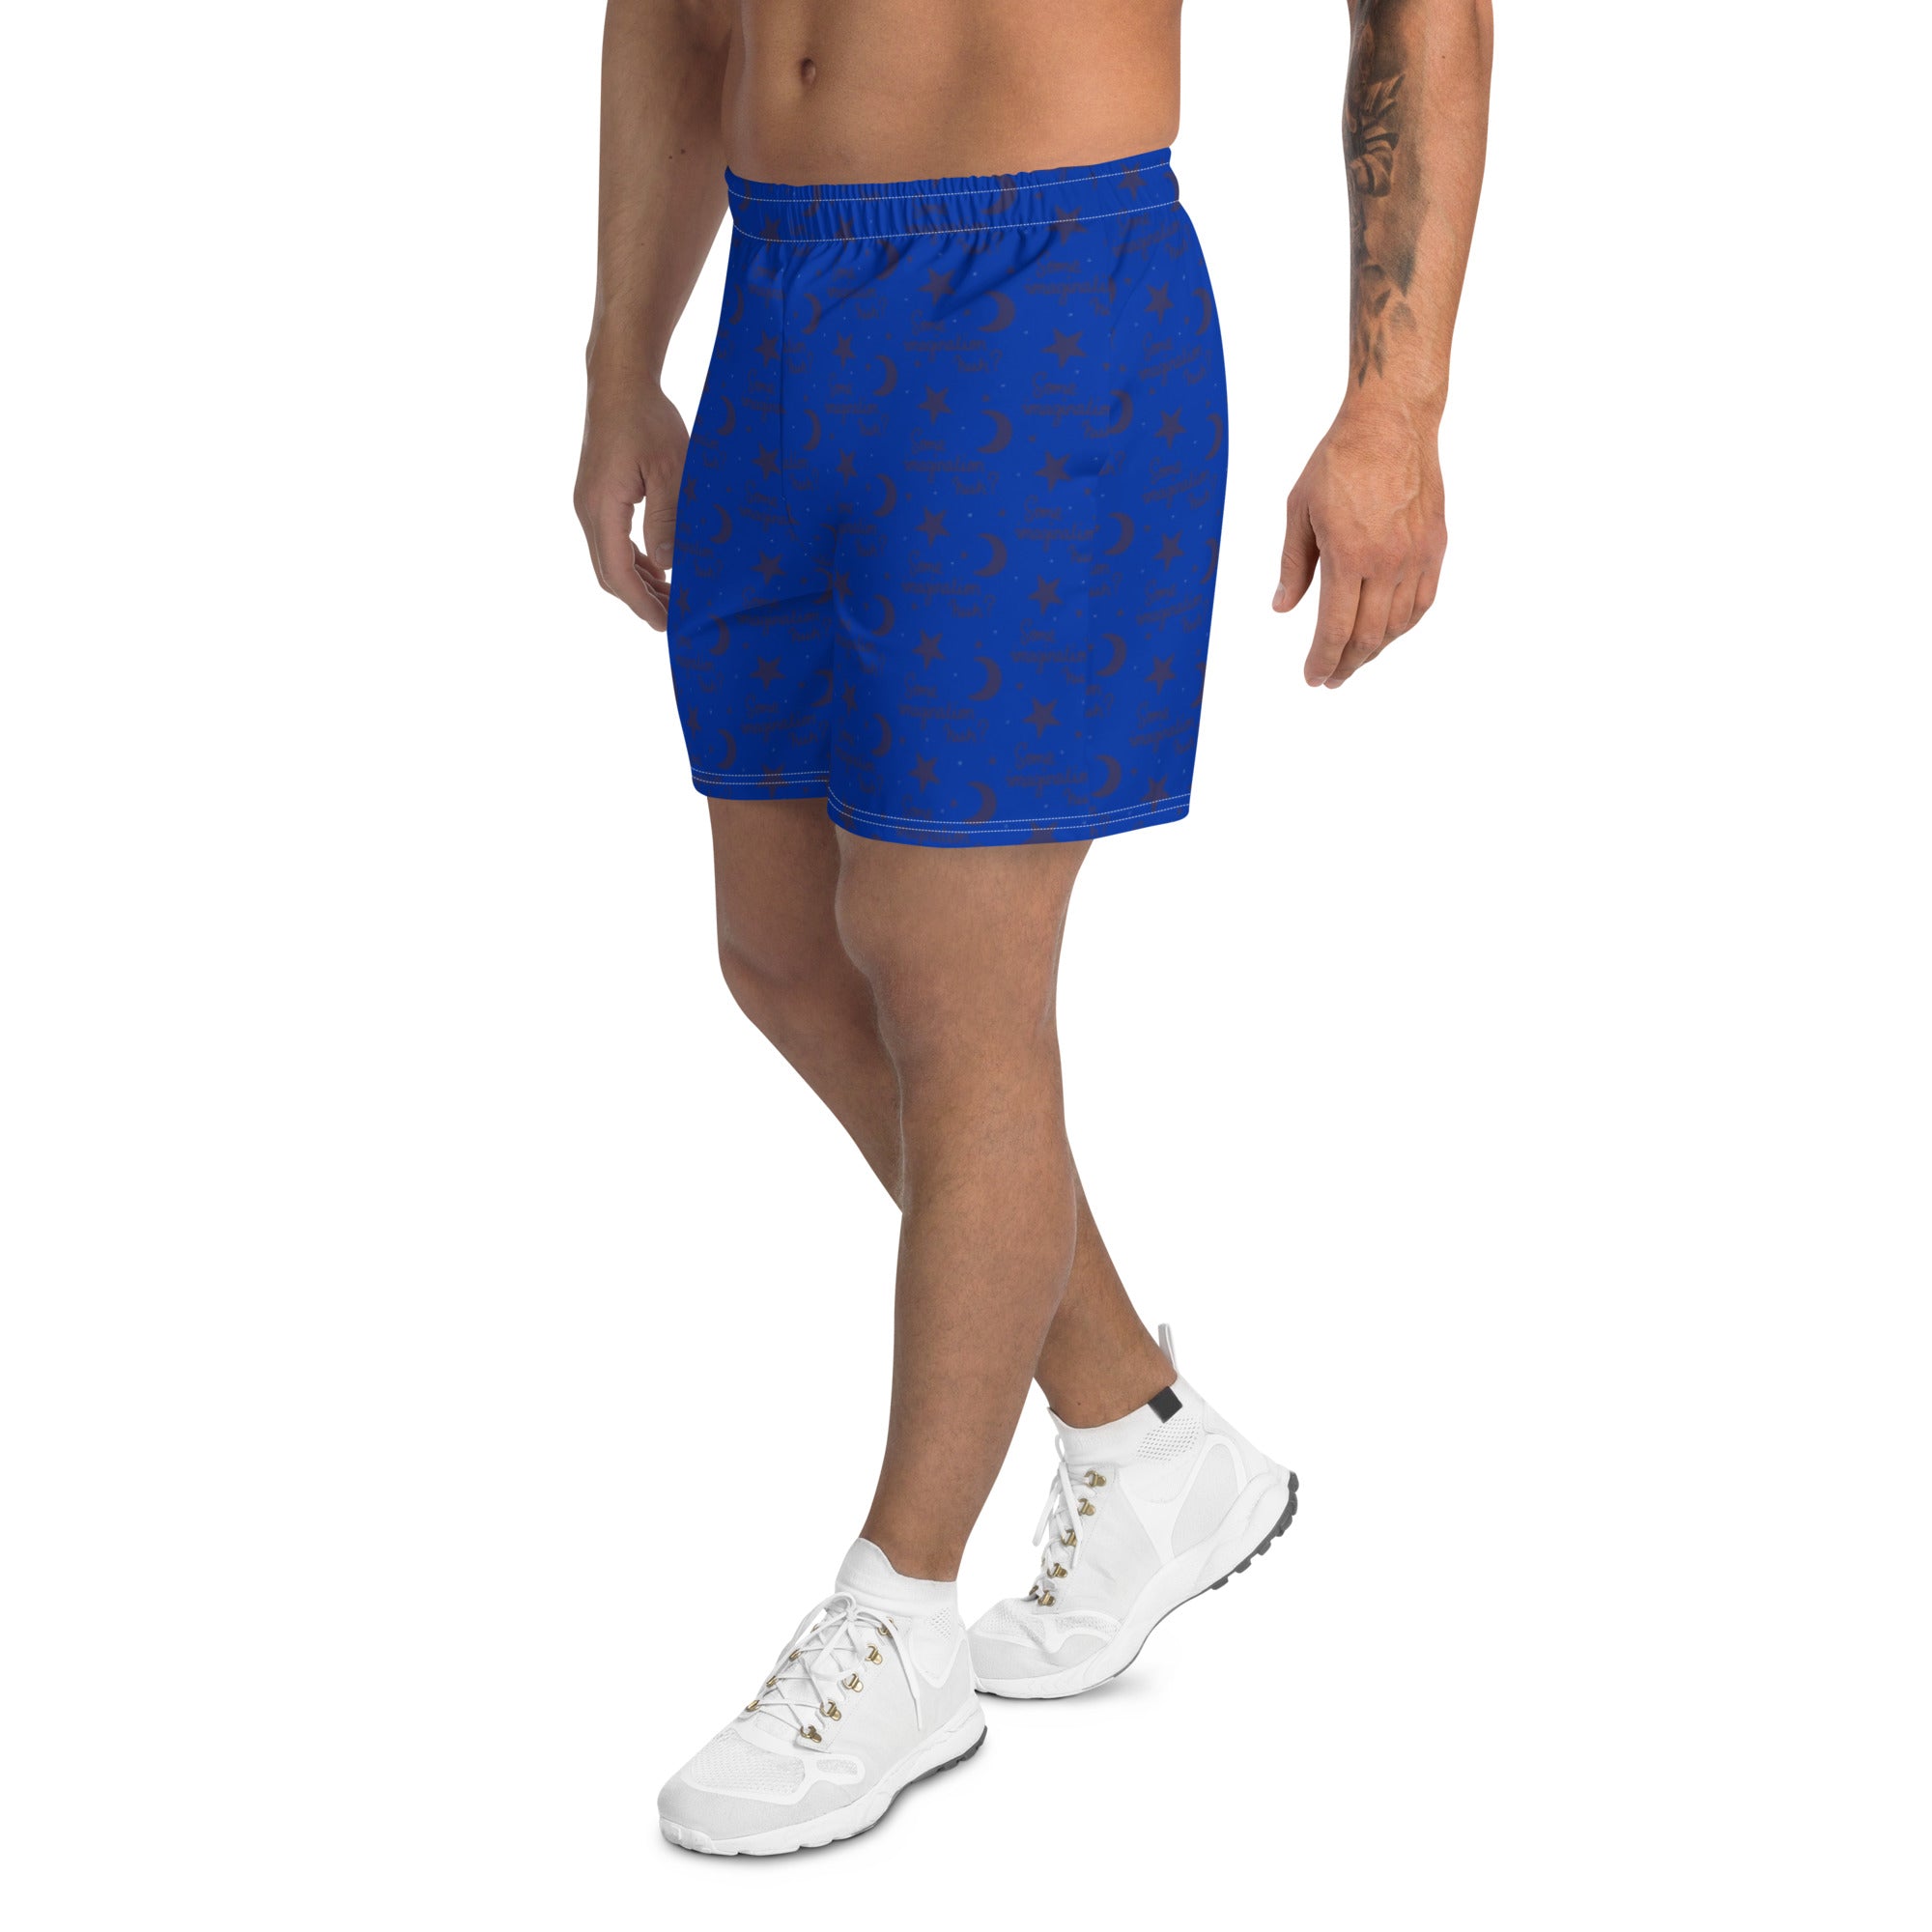 Some Imagination Men's Recycled Athletic Shorts